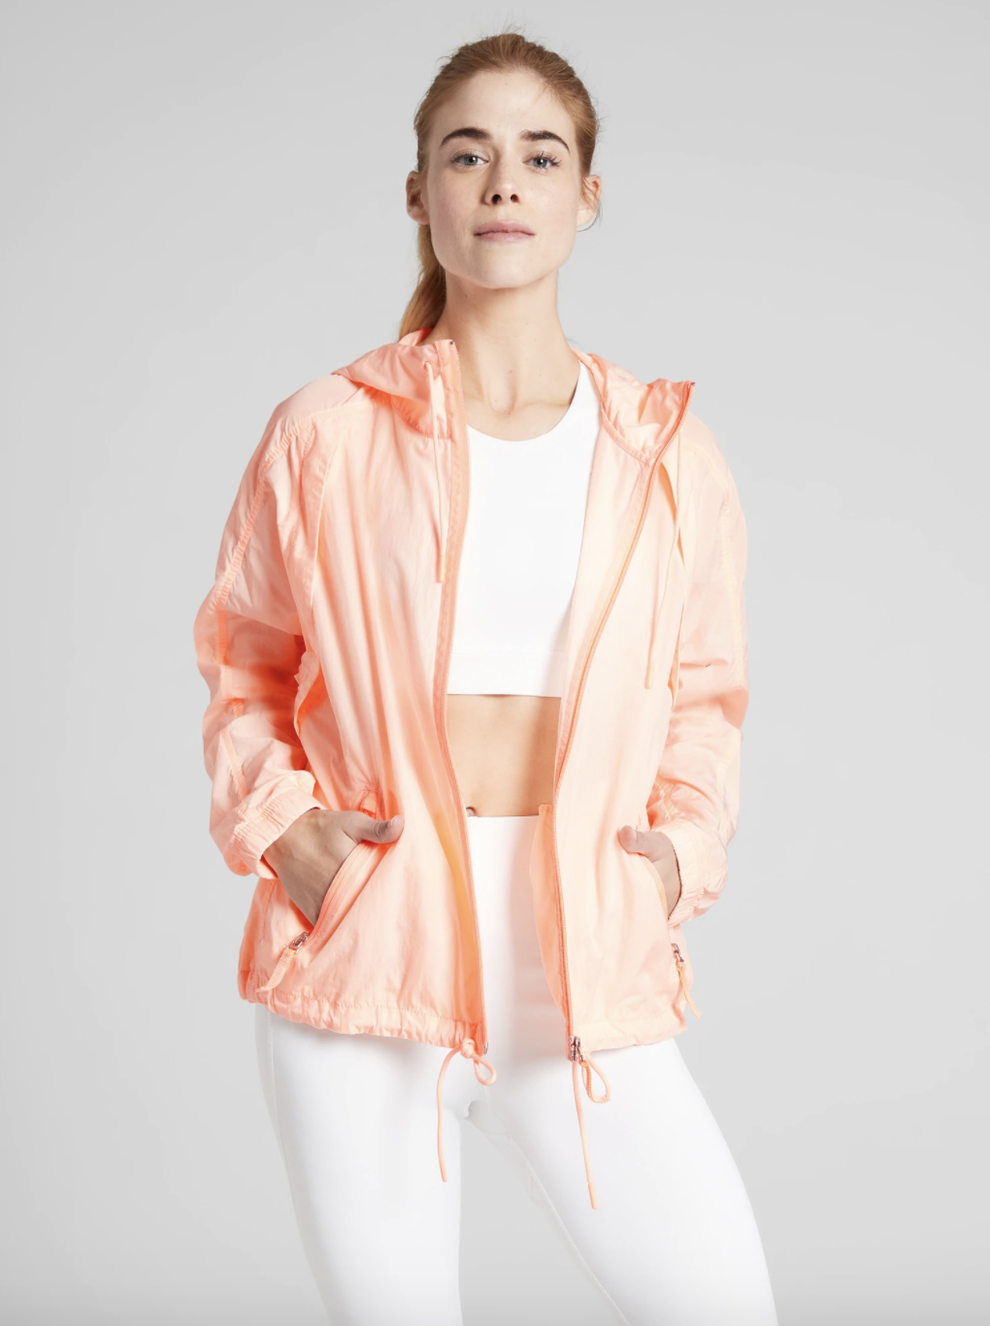 22 Pieces Of Workout Clothing You May Want From Athleta